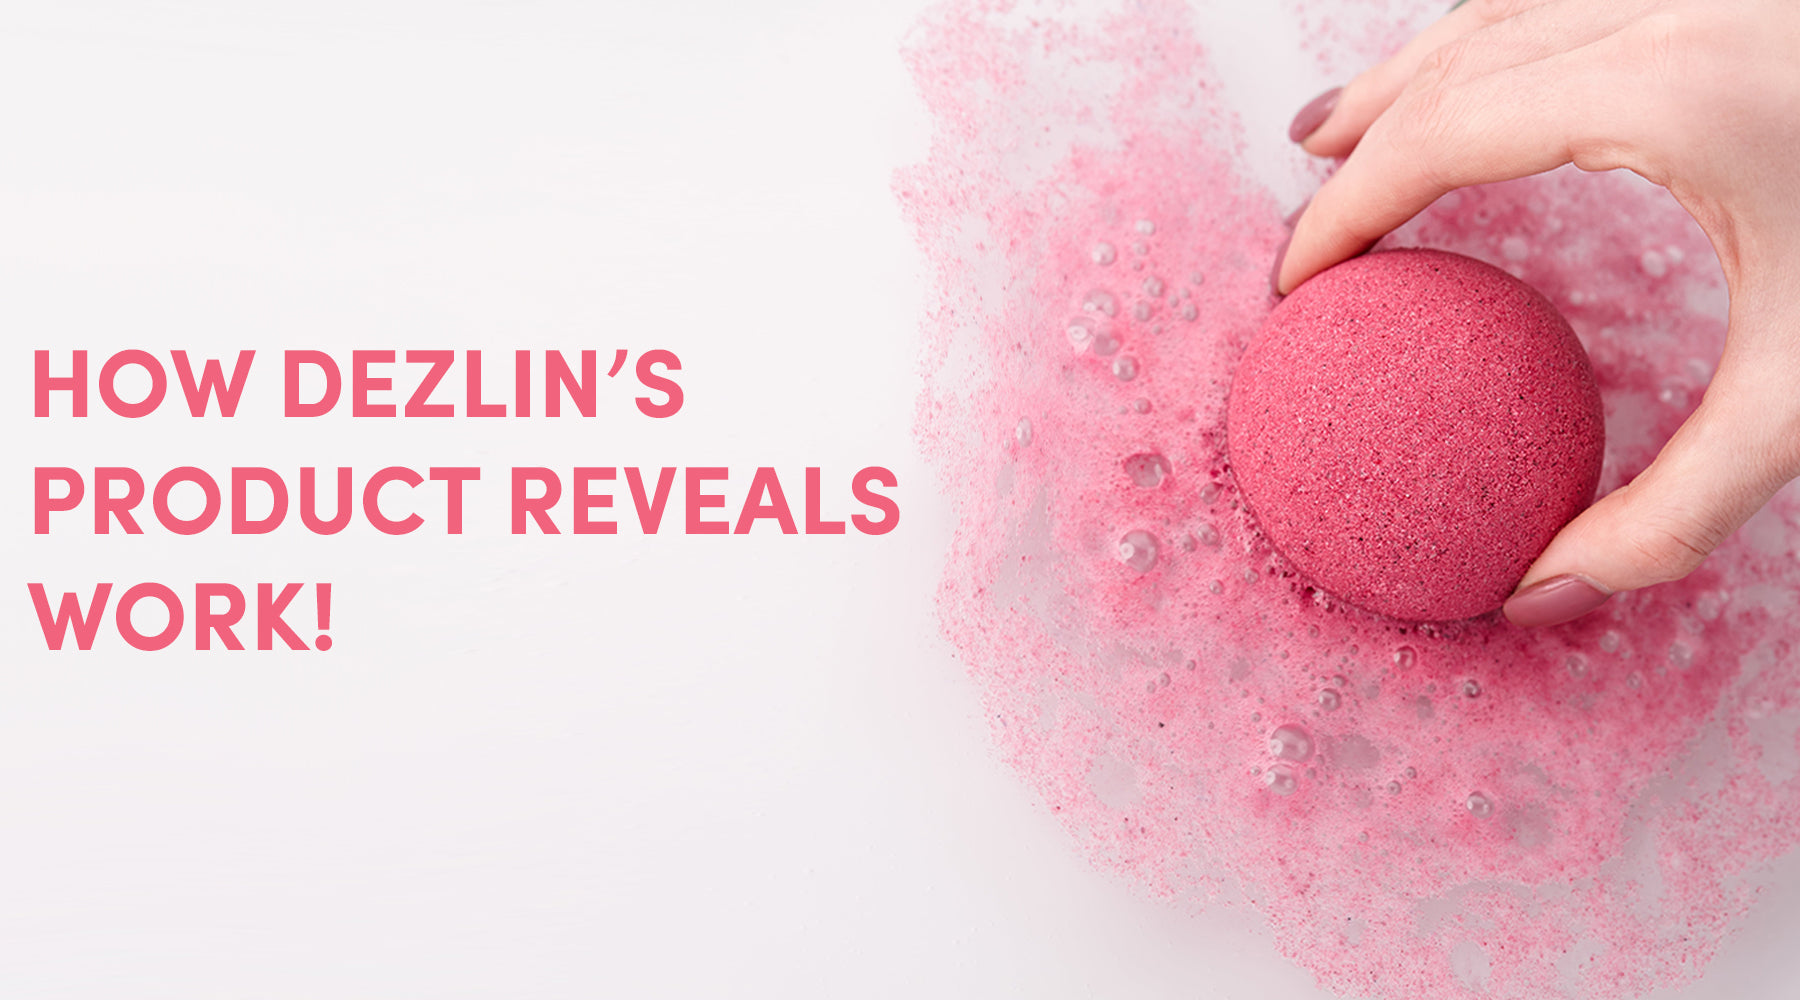 How DezLin's Product Reveals Work